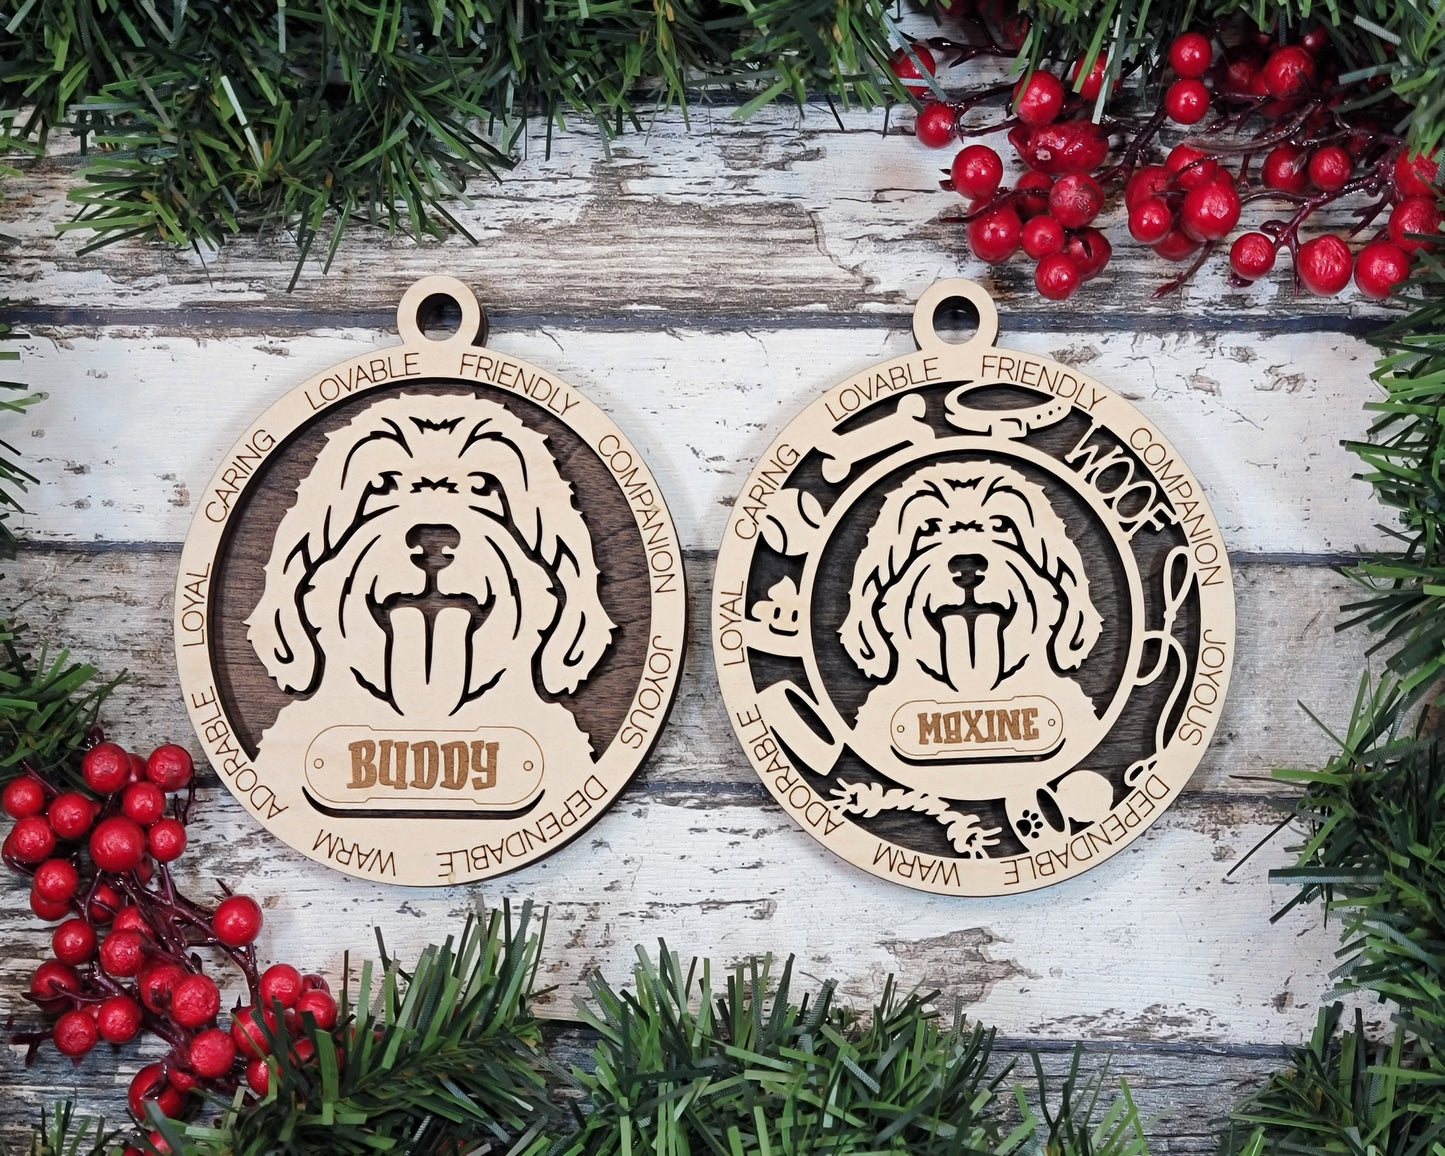 Cockapoo - Adorable Dog Ornaments - 2 Ornaments included - SVG, PDF, AI File Download - Sized for Glowforge